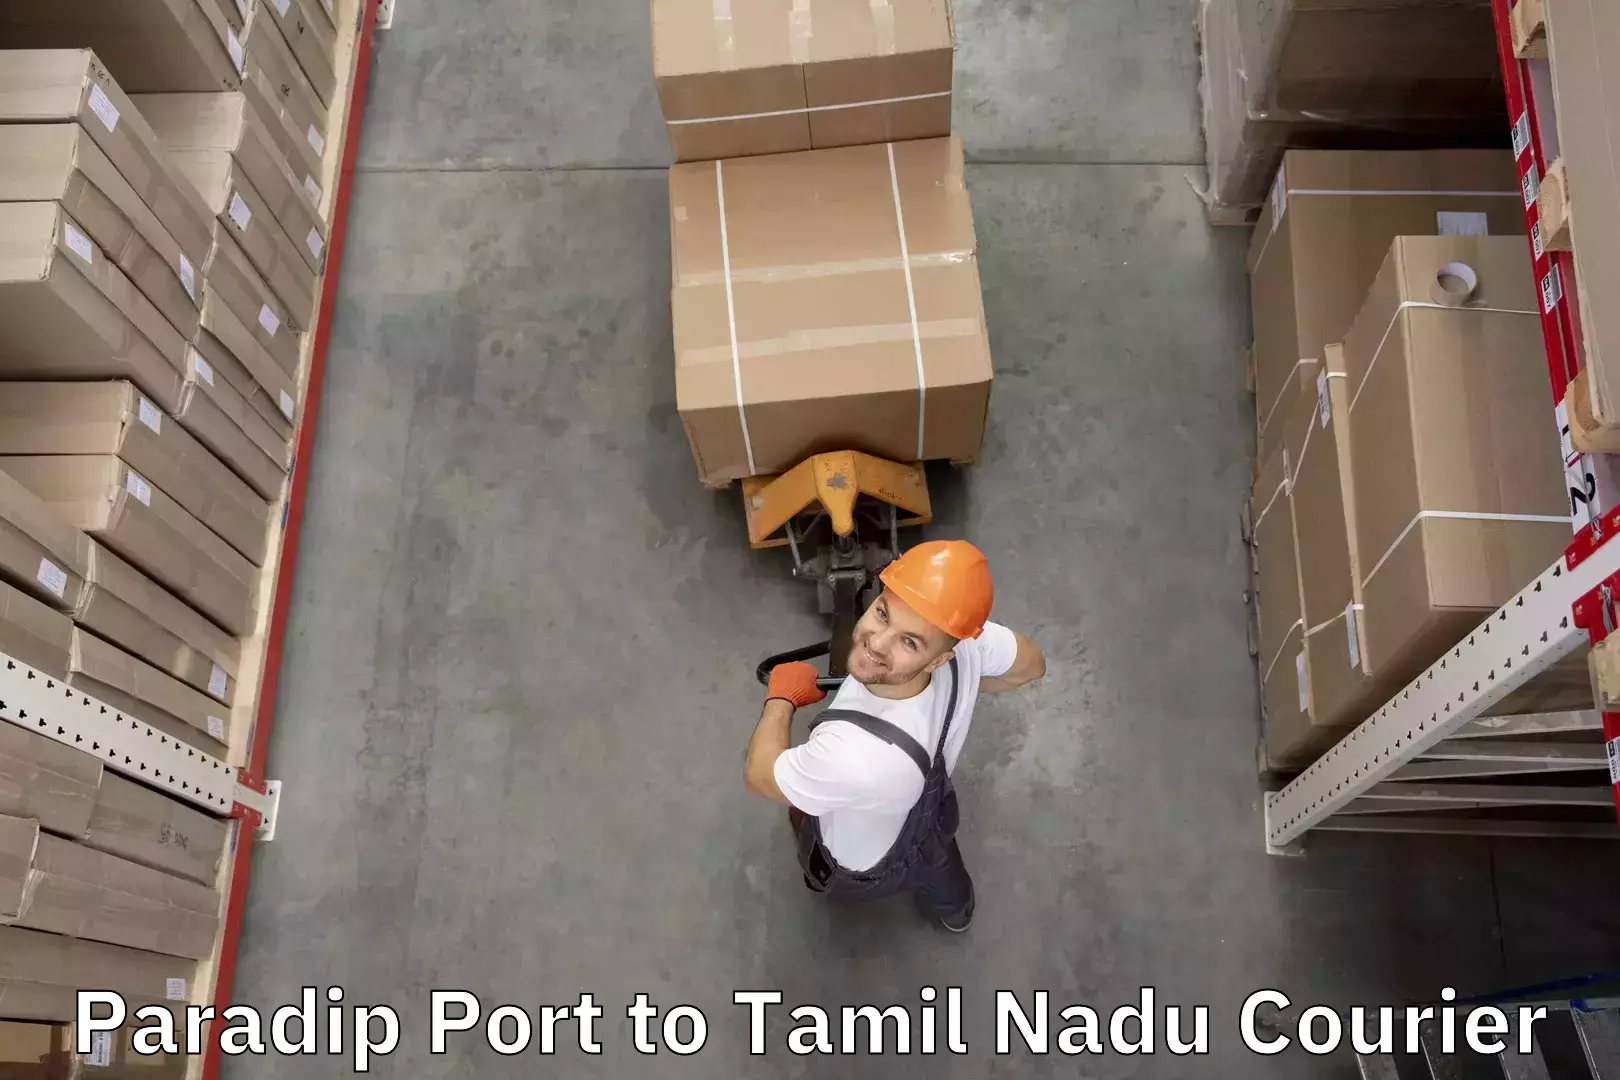 Nationwide luggage courier Paradip Port to Cuddalore